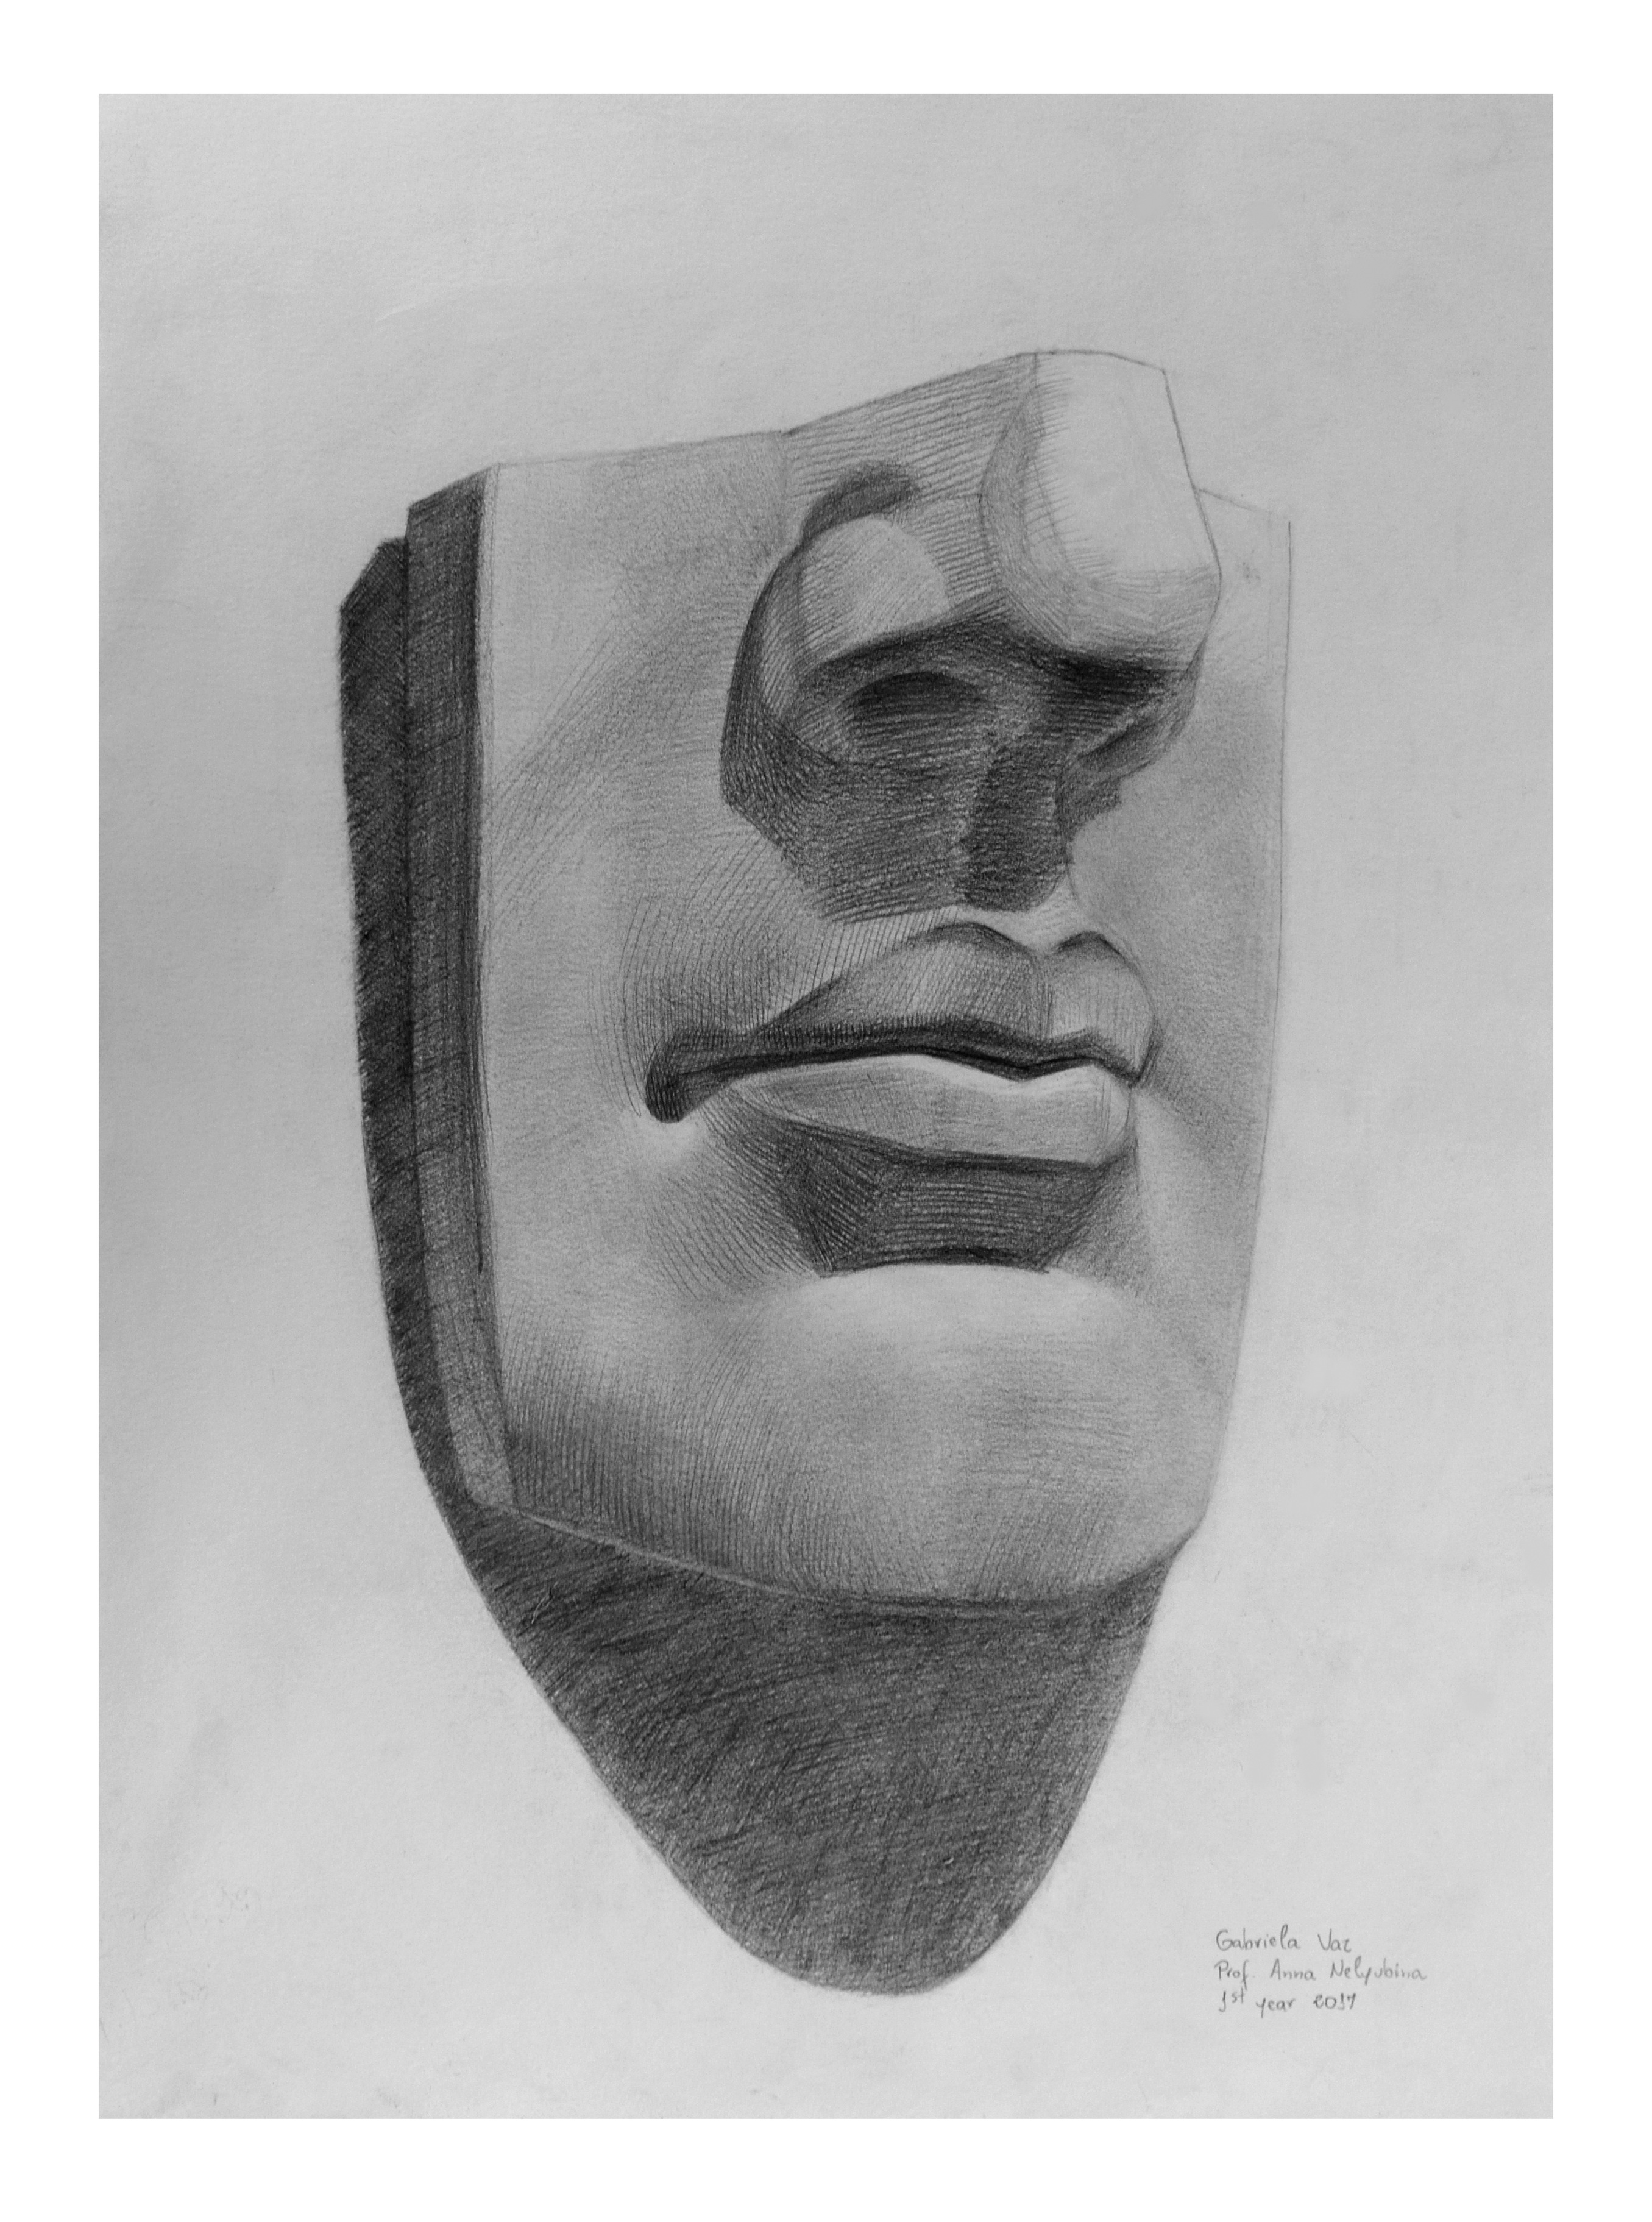 David’s mouth and nose cast, graphite on paper, 30 x 20 cm, 2017